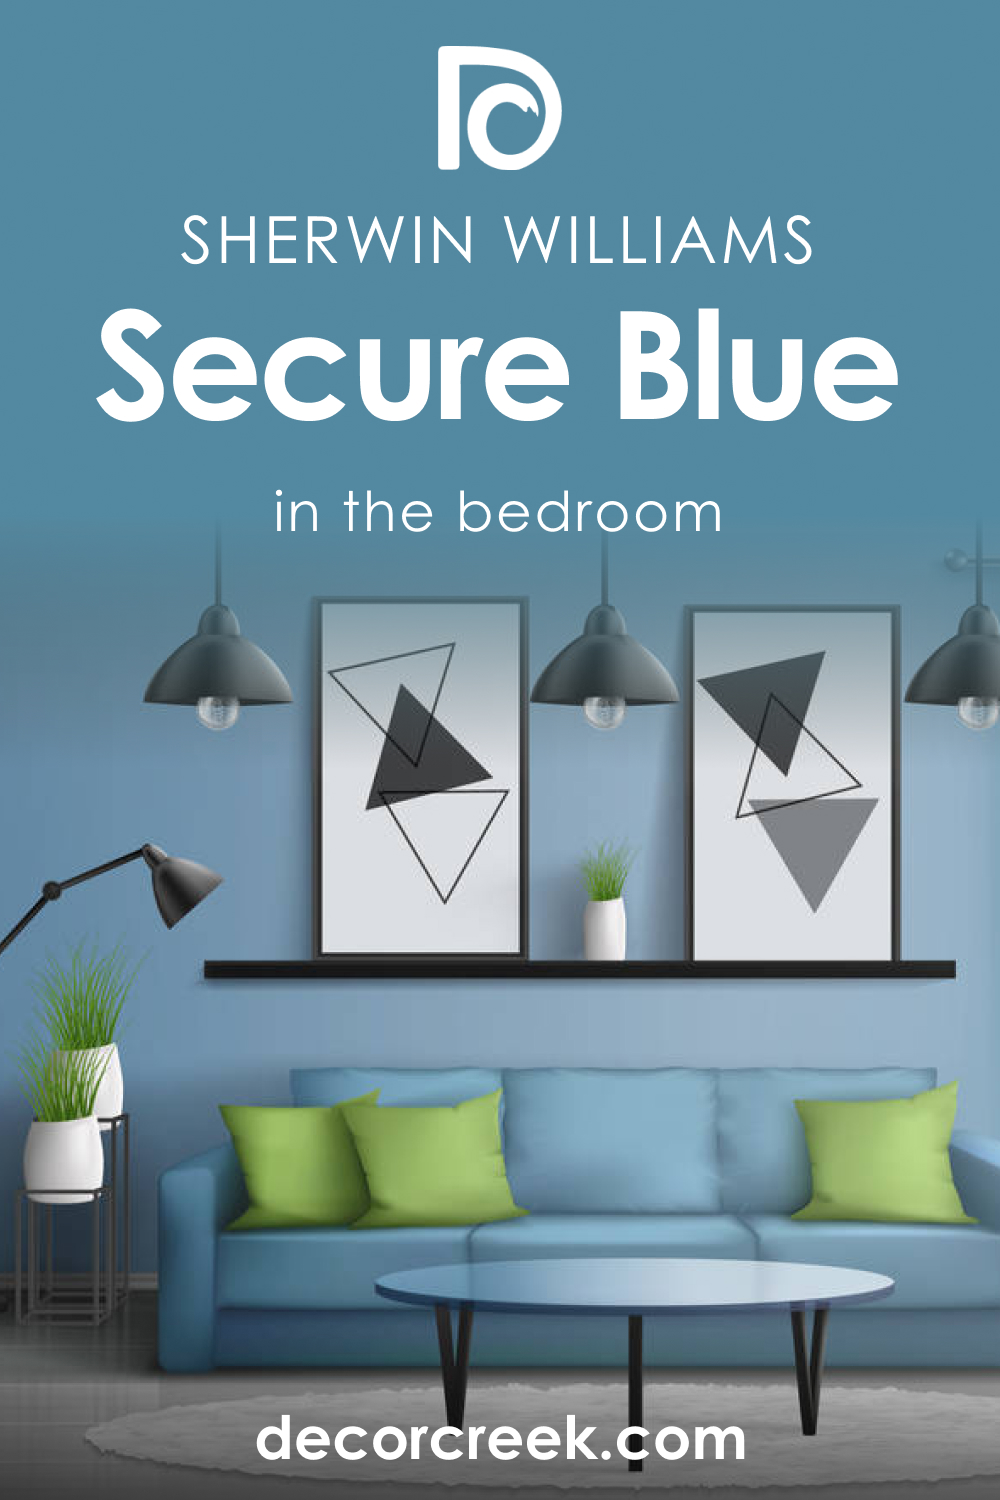 How to Use Secure Blue SW 6508 in the Bedroom?